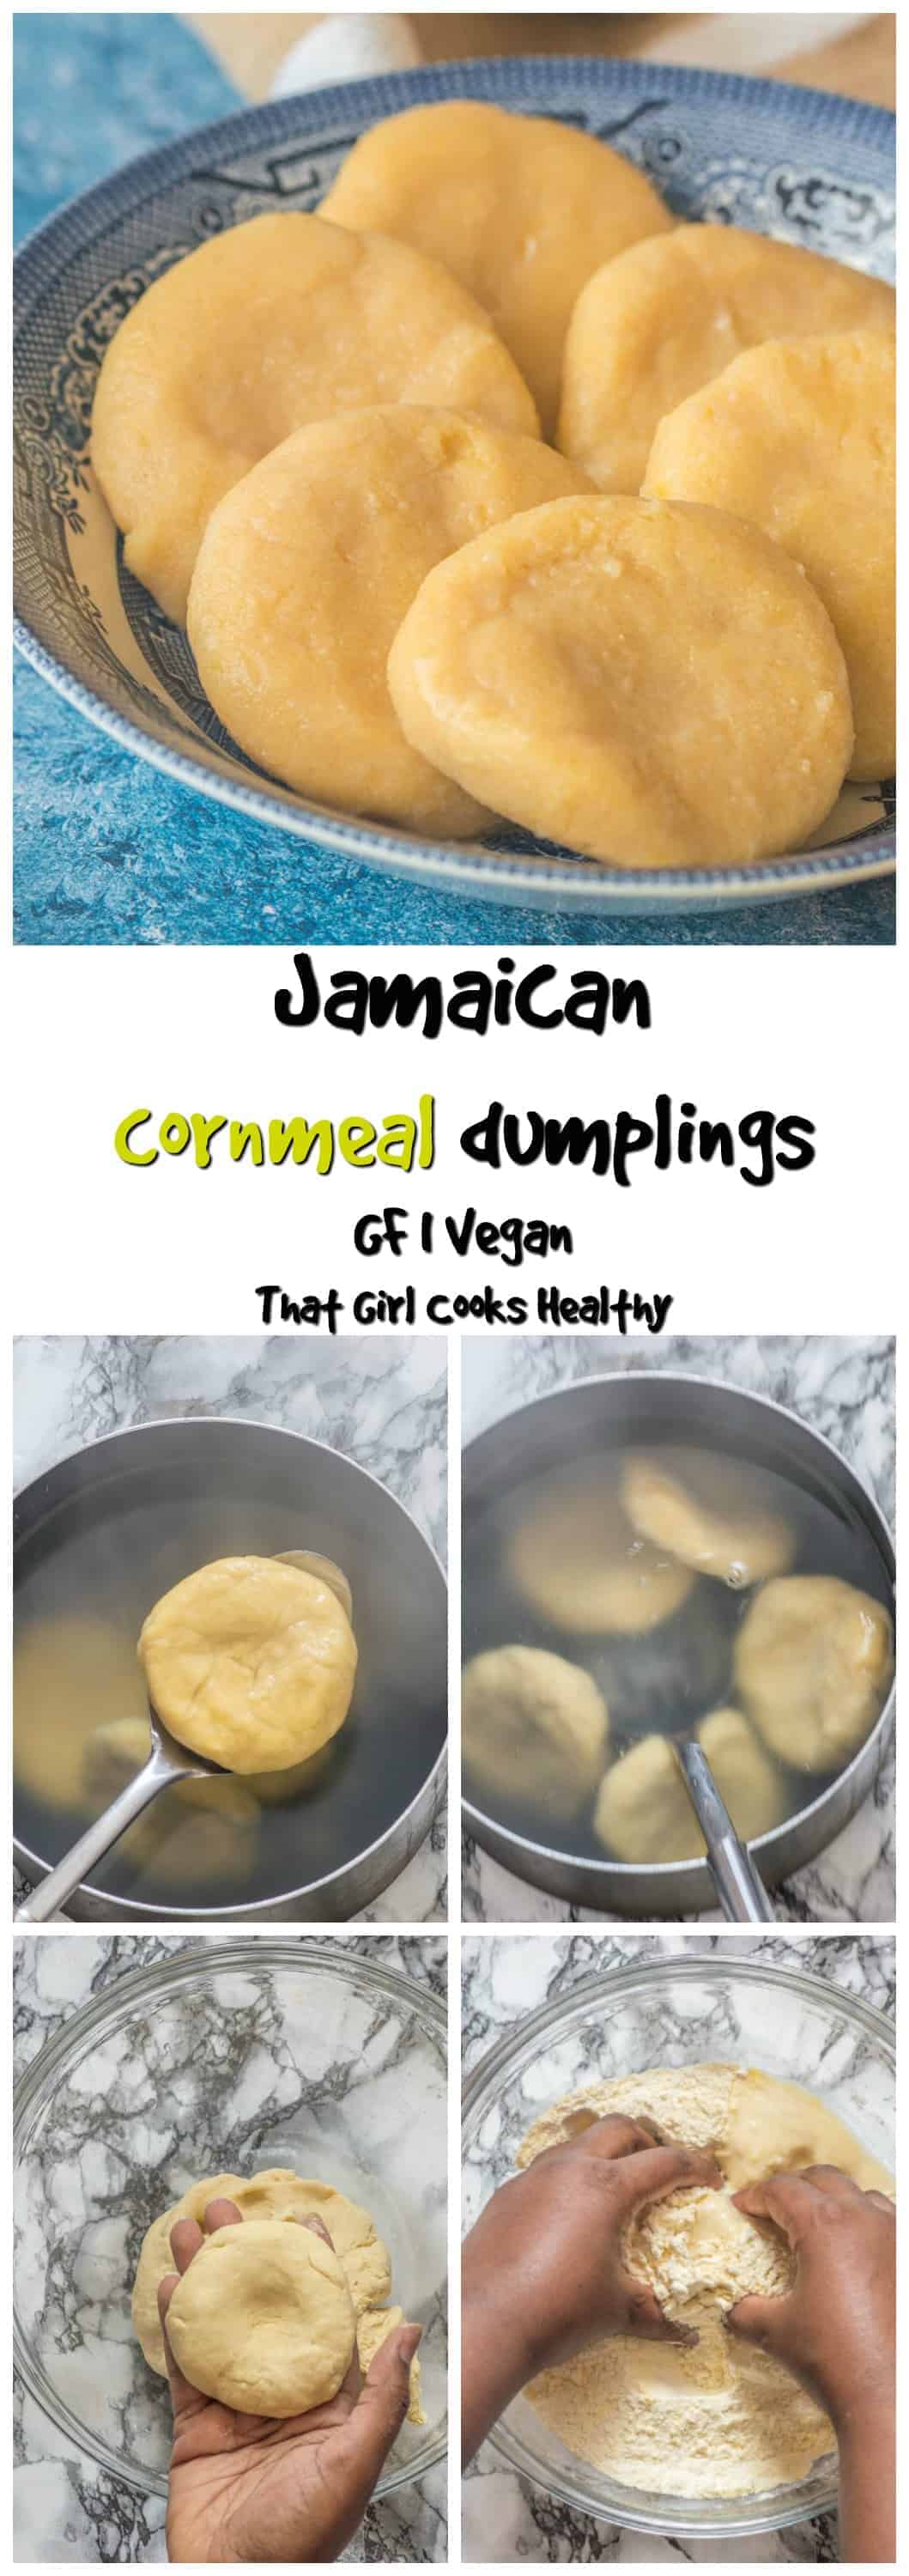 These Jamaican cornmeal dumplings are so quick and easy, gluten and wheat free alternative for soup and stews